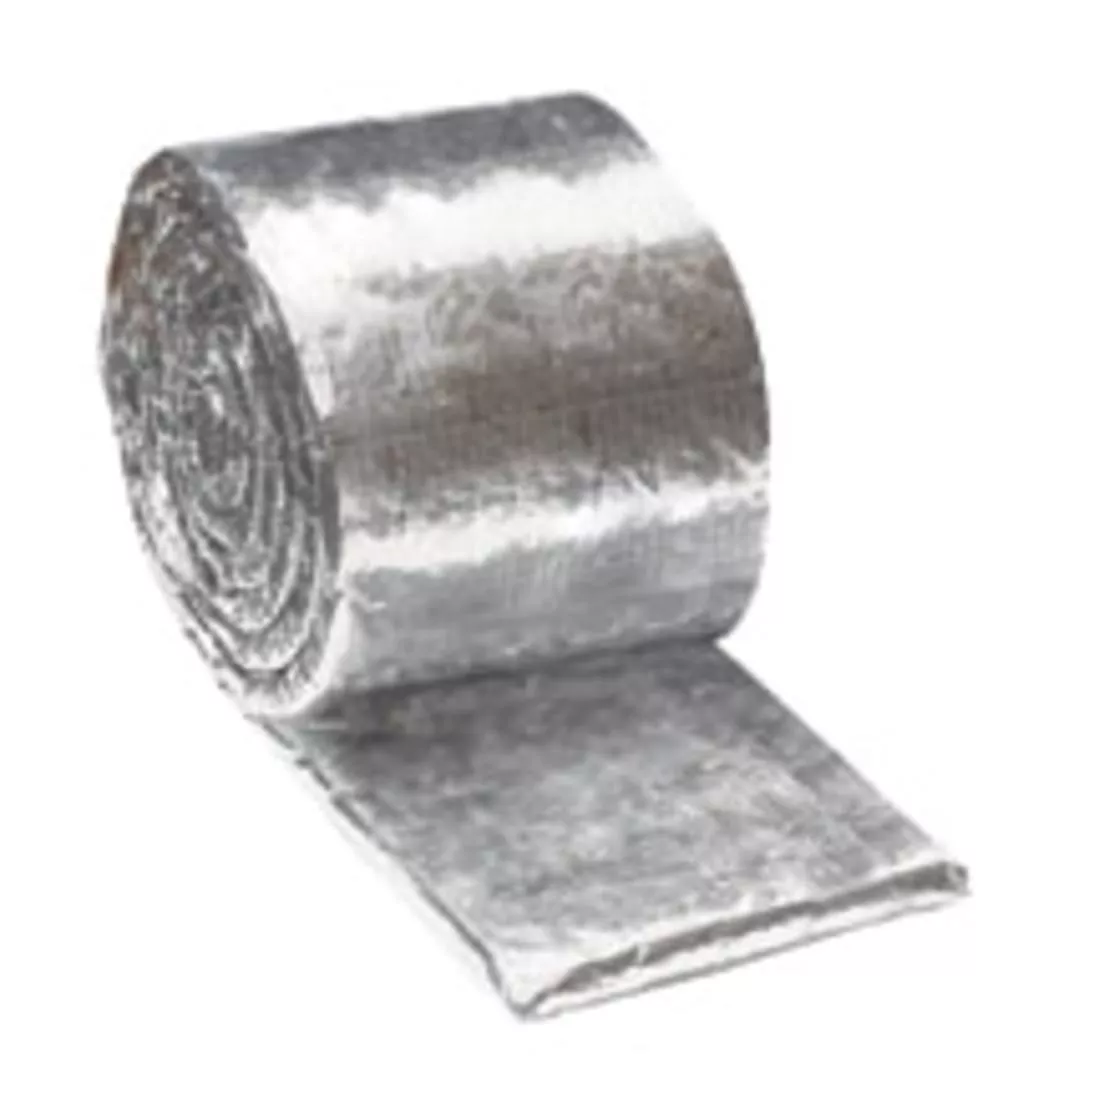 3M™ Fire Barrier Duct Wrap Collar 615+, 1.5 in x 6 in x 25 ft, 4/case